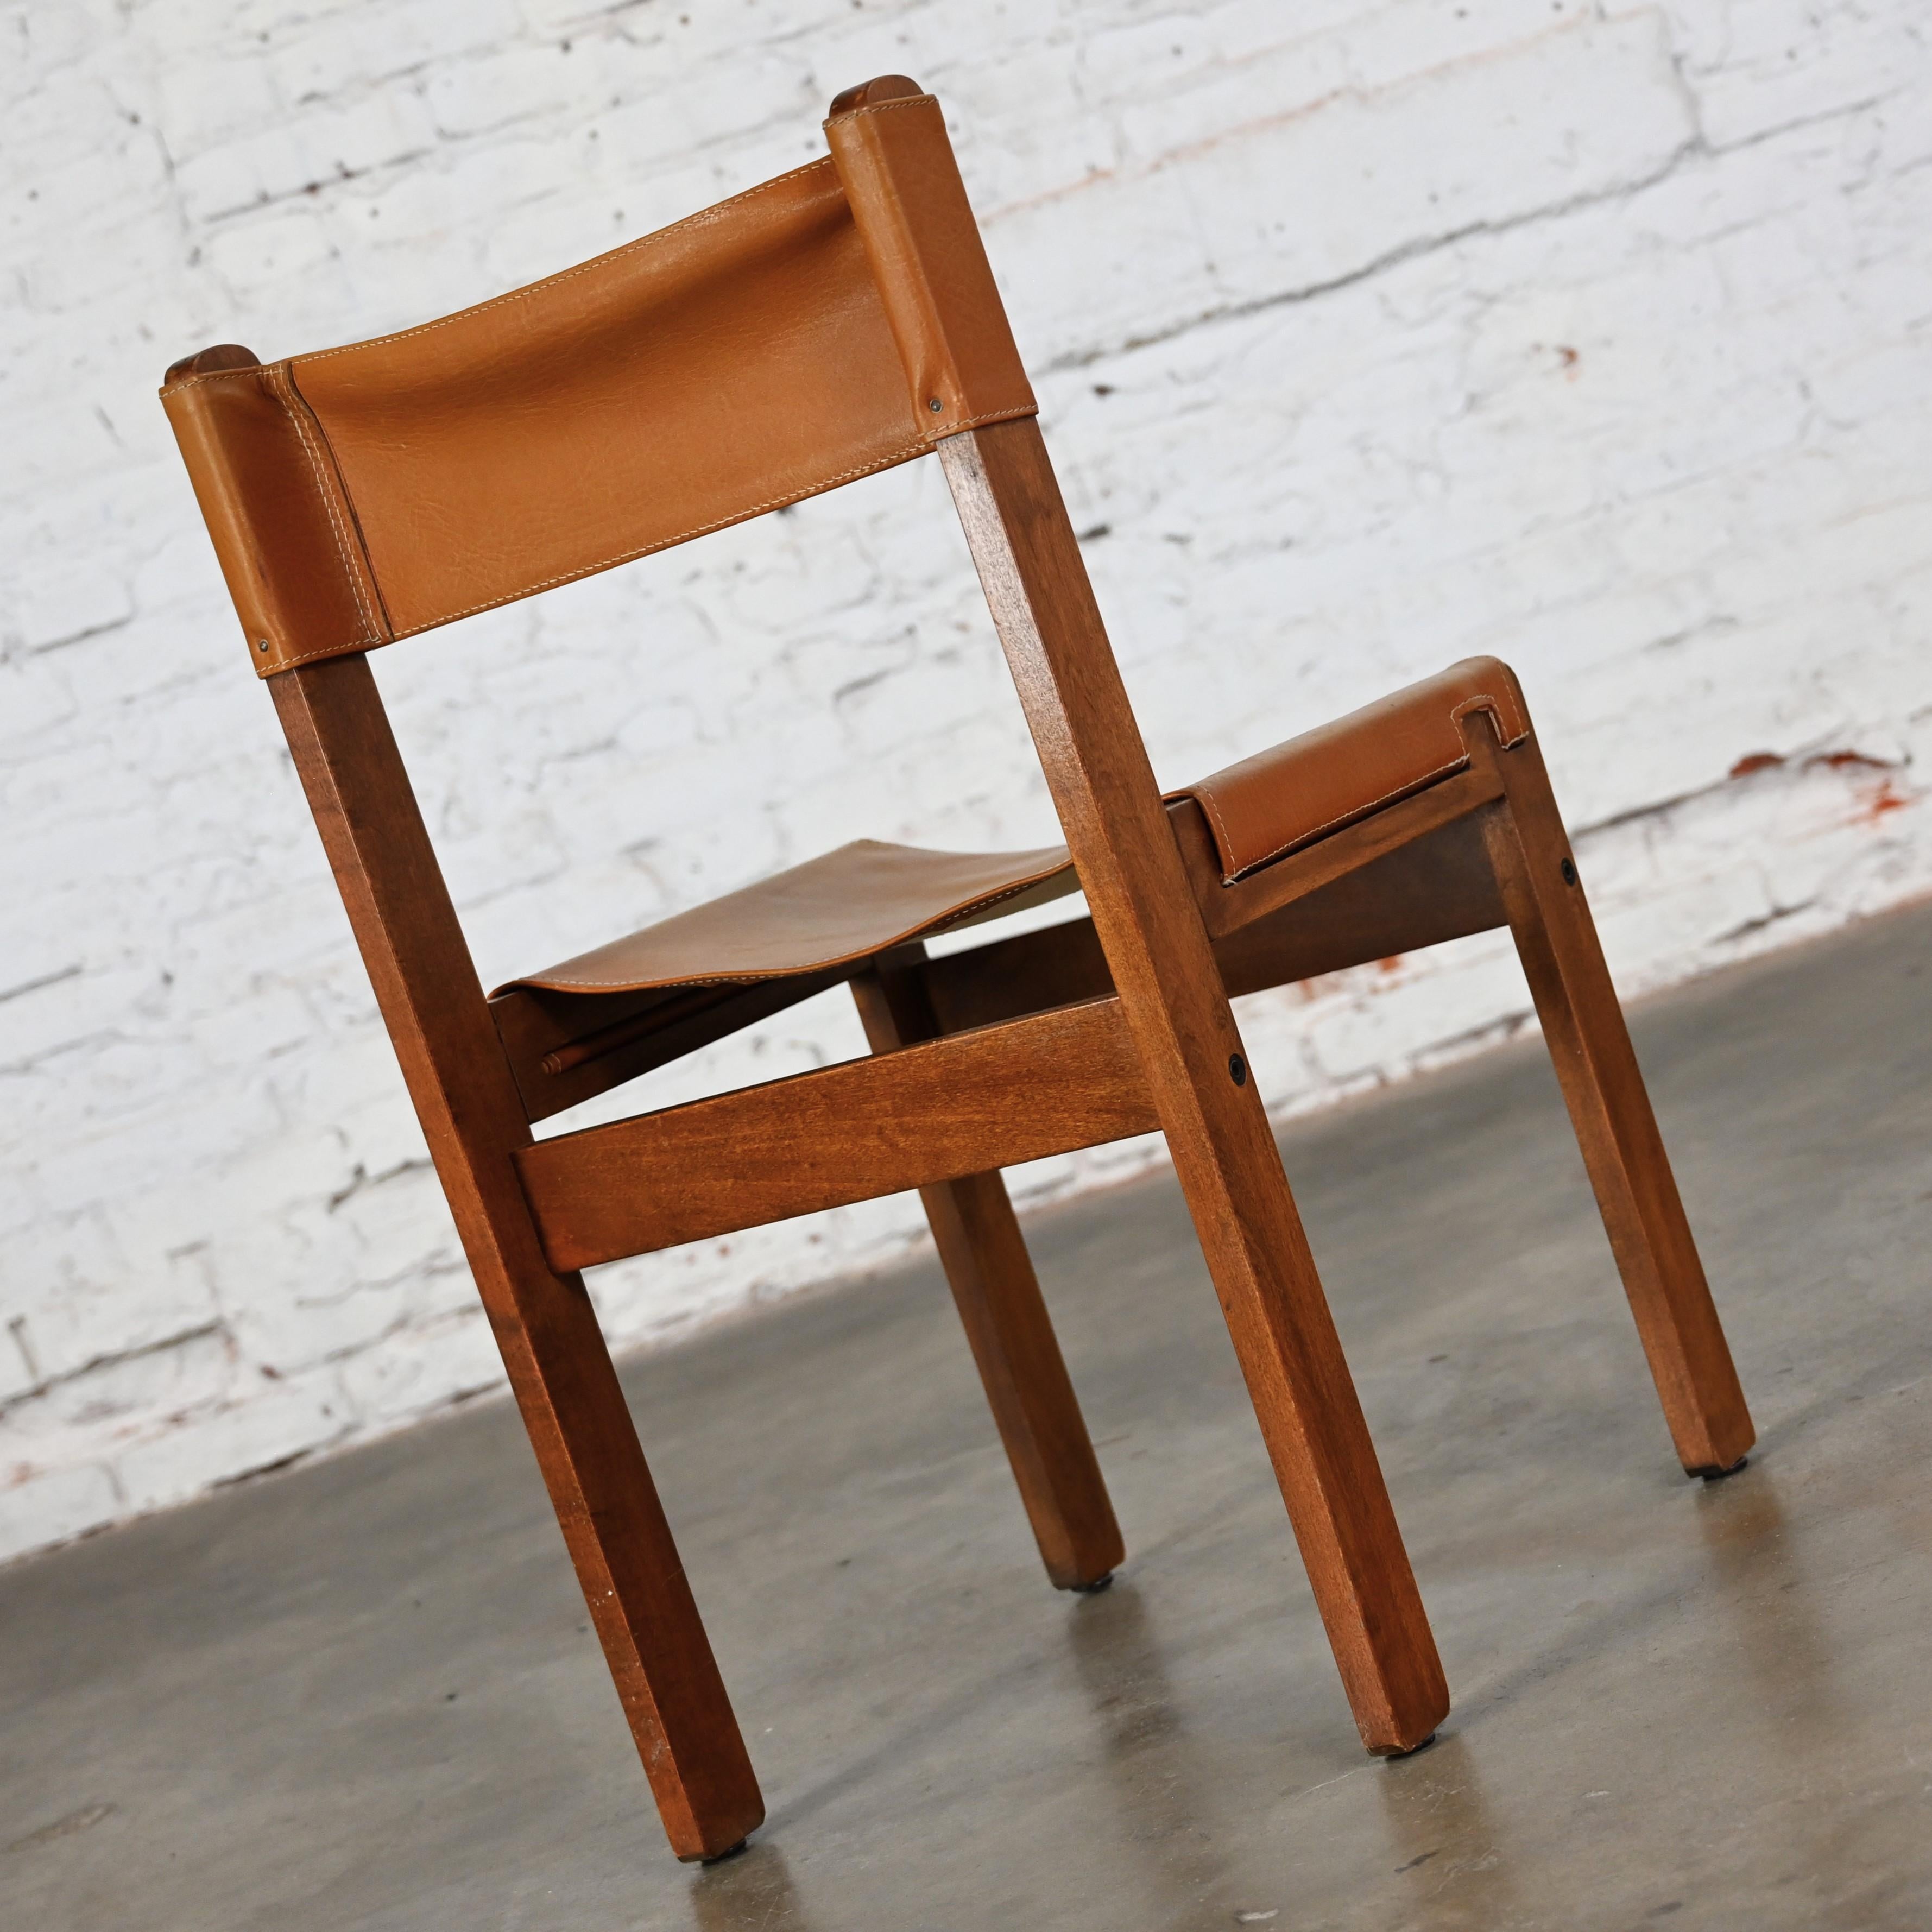 1970’s Modern Sling Chair Teak & Leather Style Michel Arnoult Made in Argentina For Sale 2